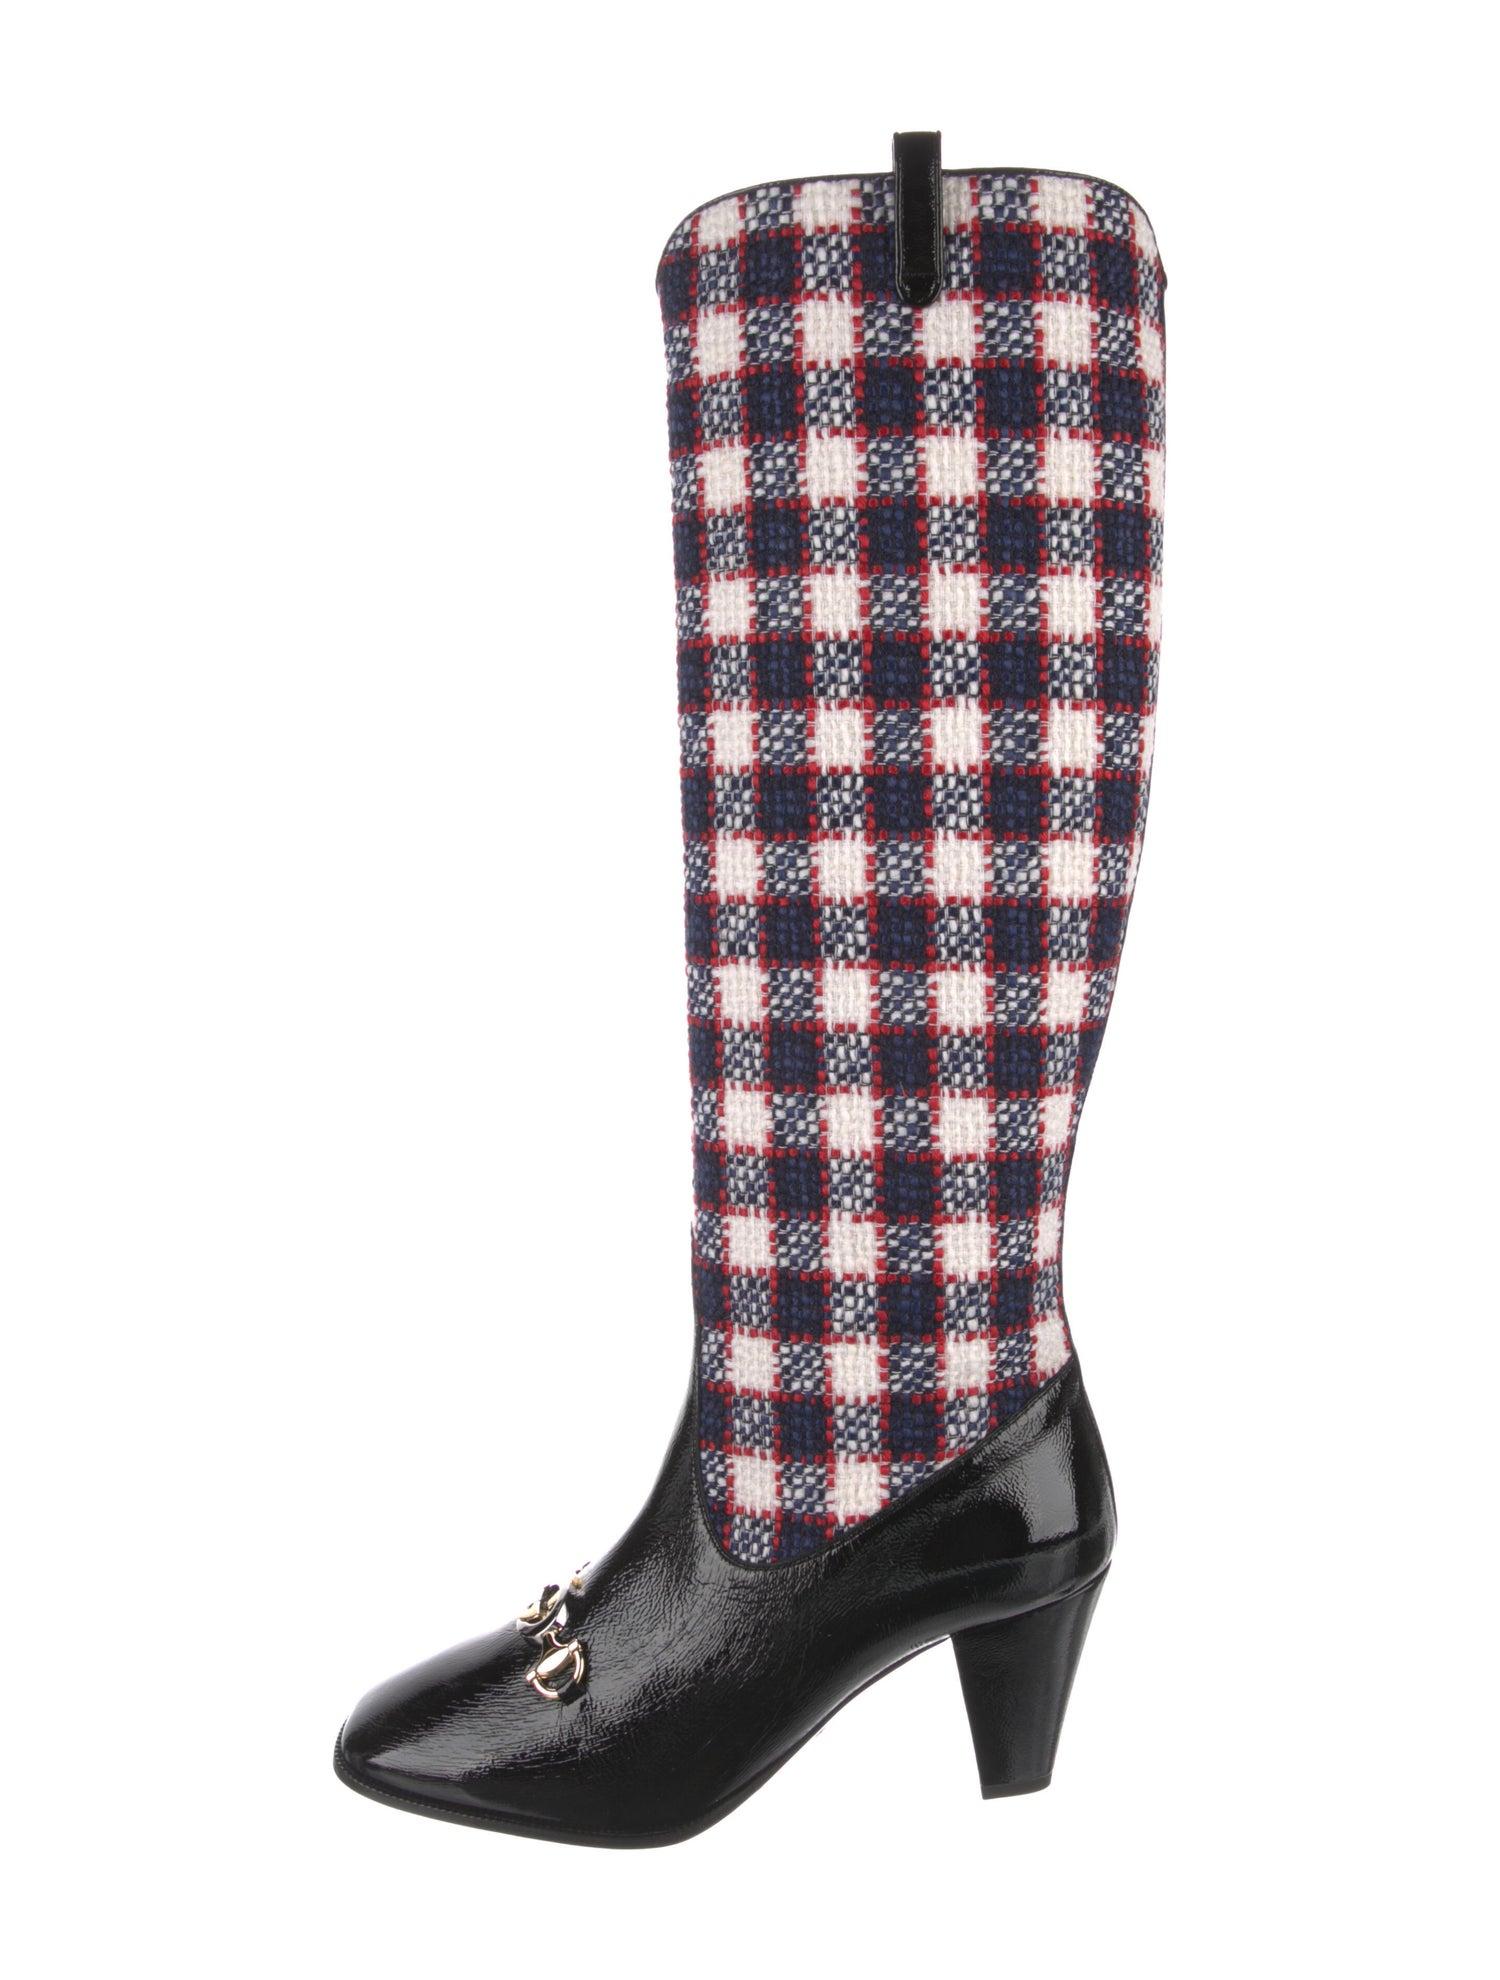 Women's New With Box Gucci 2019 Zumi Plaid Patent and Wool Boots Sz 38